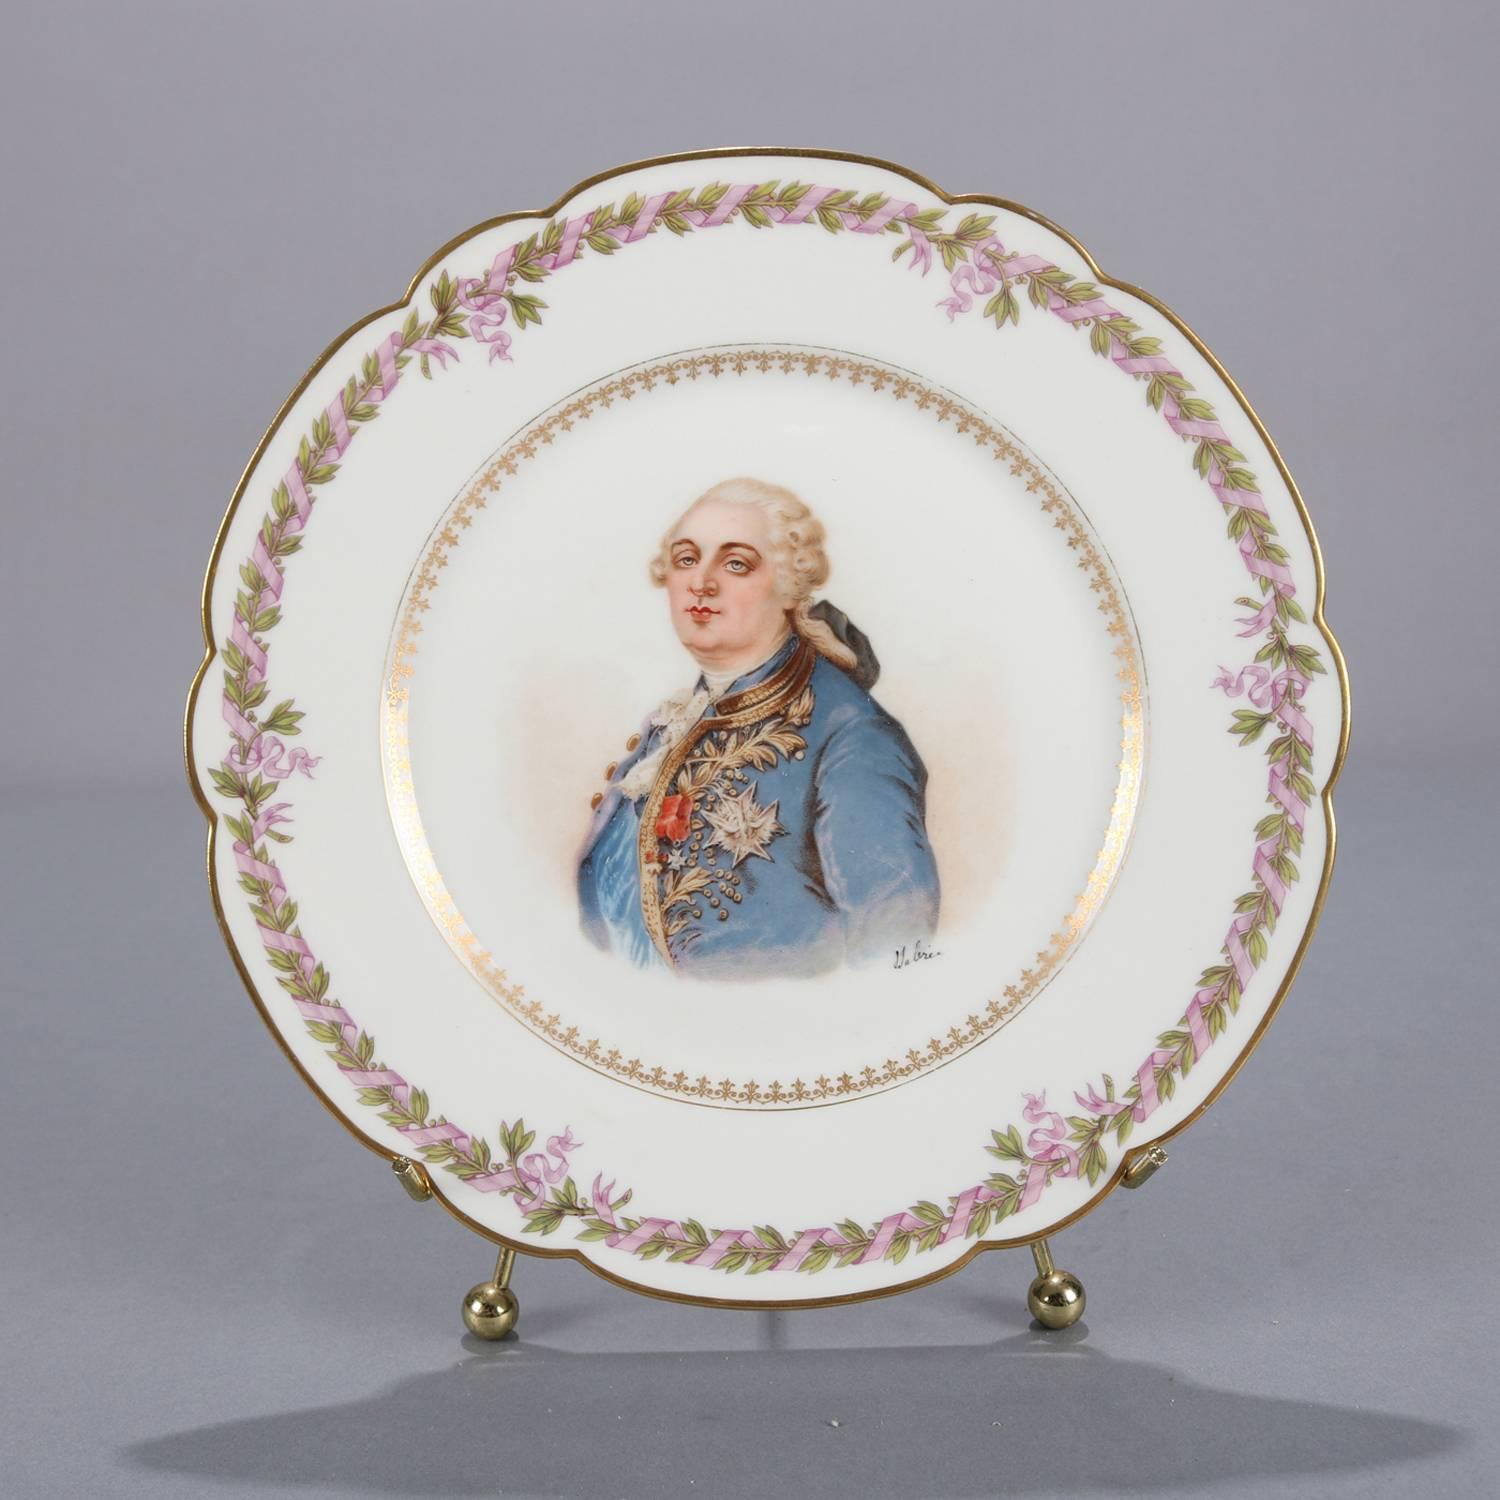 19th Century Antique French Sevres Painted and Gilt Porcelain Portrait Plate of Louis XVI